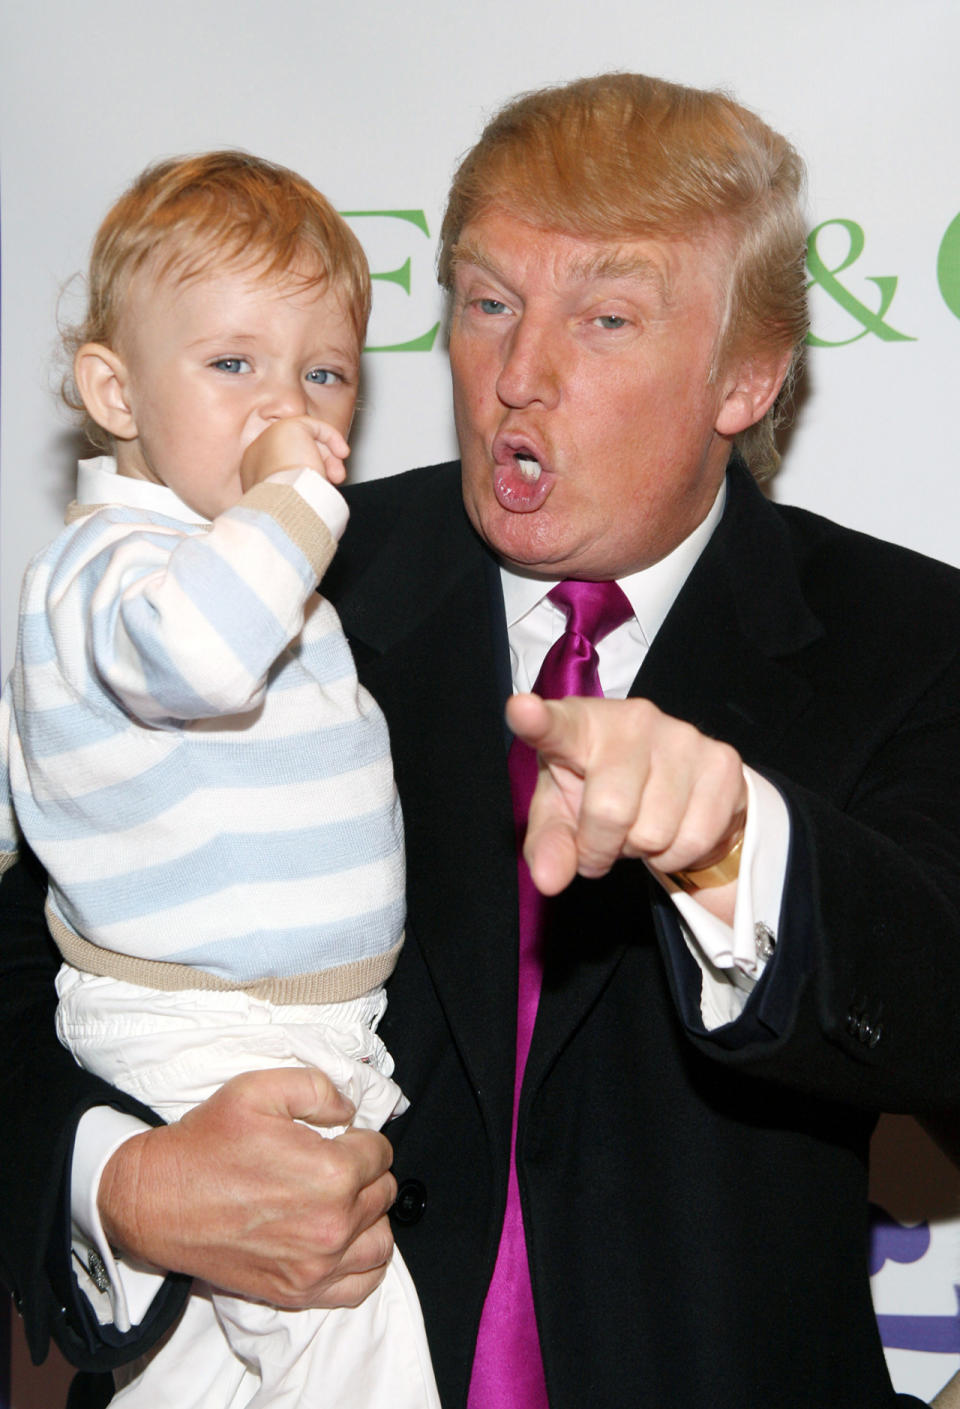 <p>Donald and Barron during the Society of Memorial Sloan-Kettering Cancer Center’s 16th Annual “Bunny Hop” at FAO Schwarz in New York on March 13, 2007. <i>(Photo: Sylvain Gaboury/FilmMagic)</i> </p>